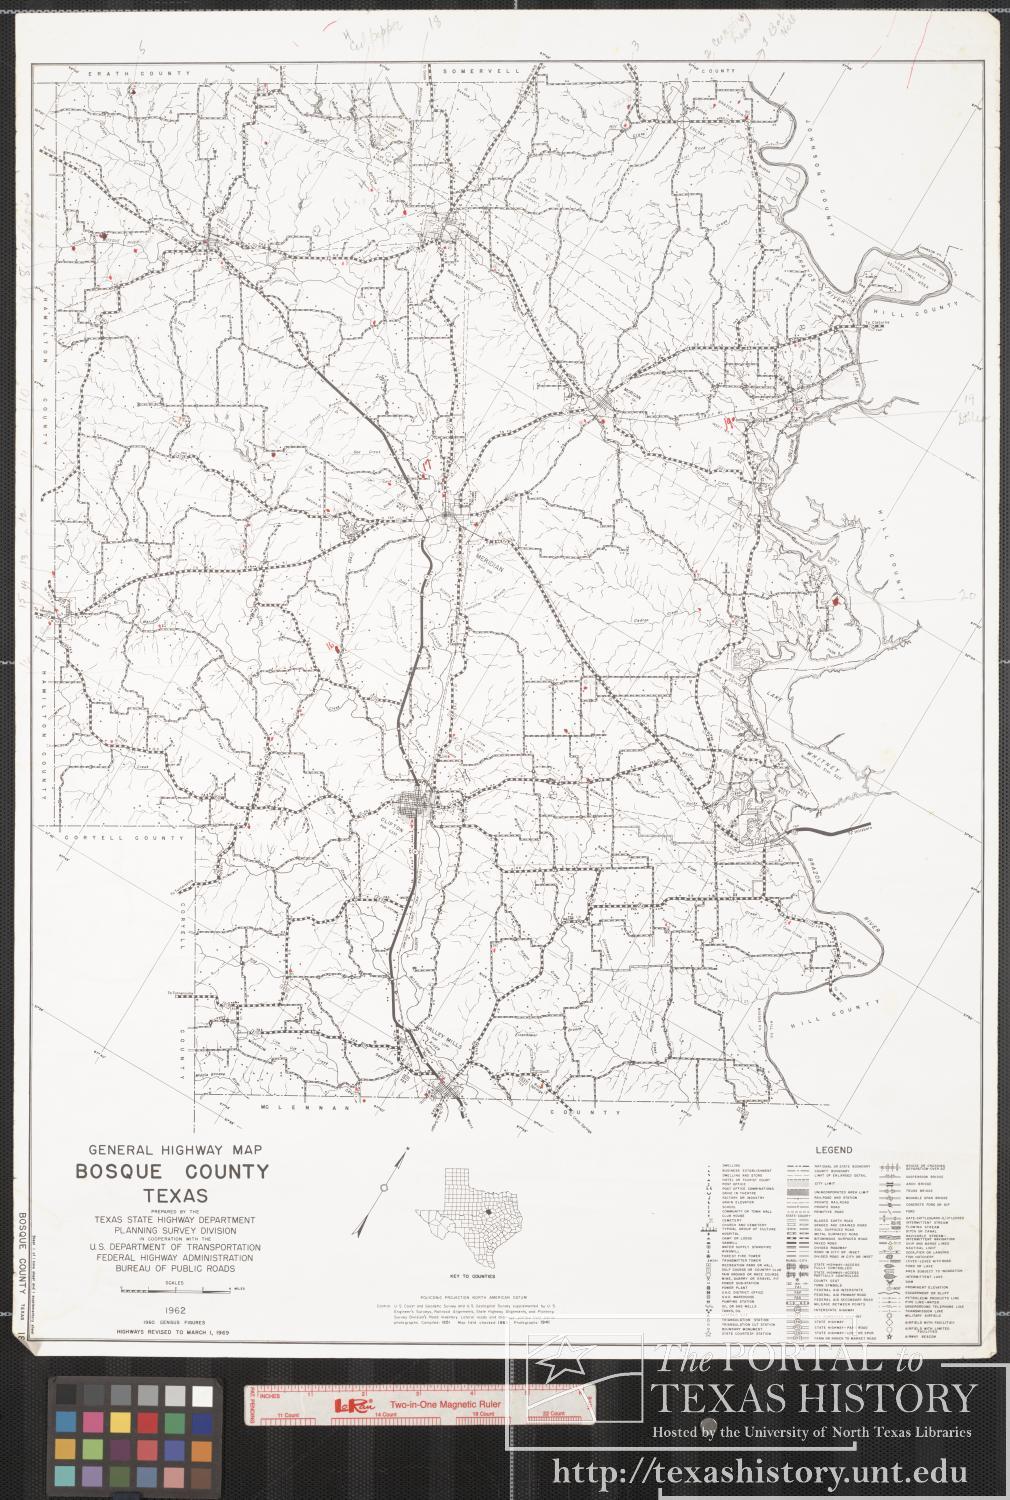 1962 General Highway Map Of Bosque County Texas Side 1 Of 1 The